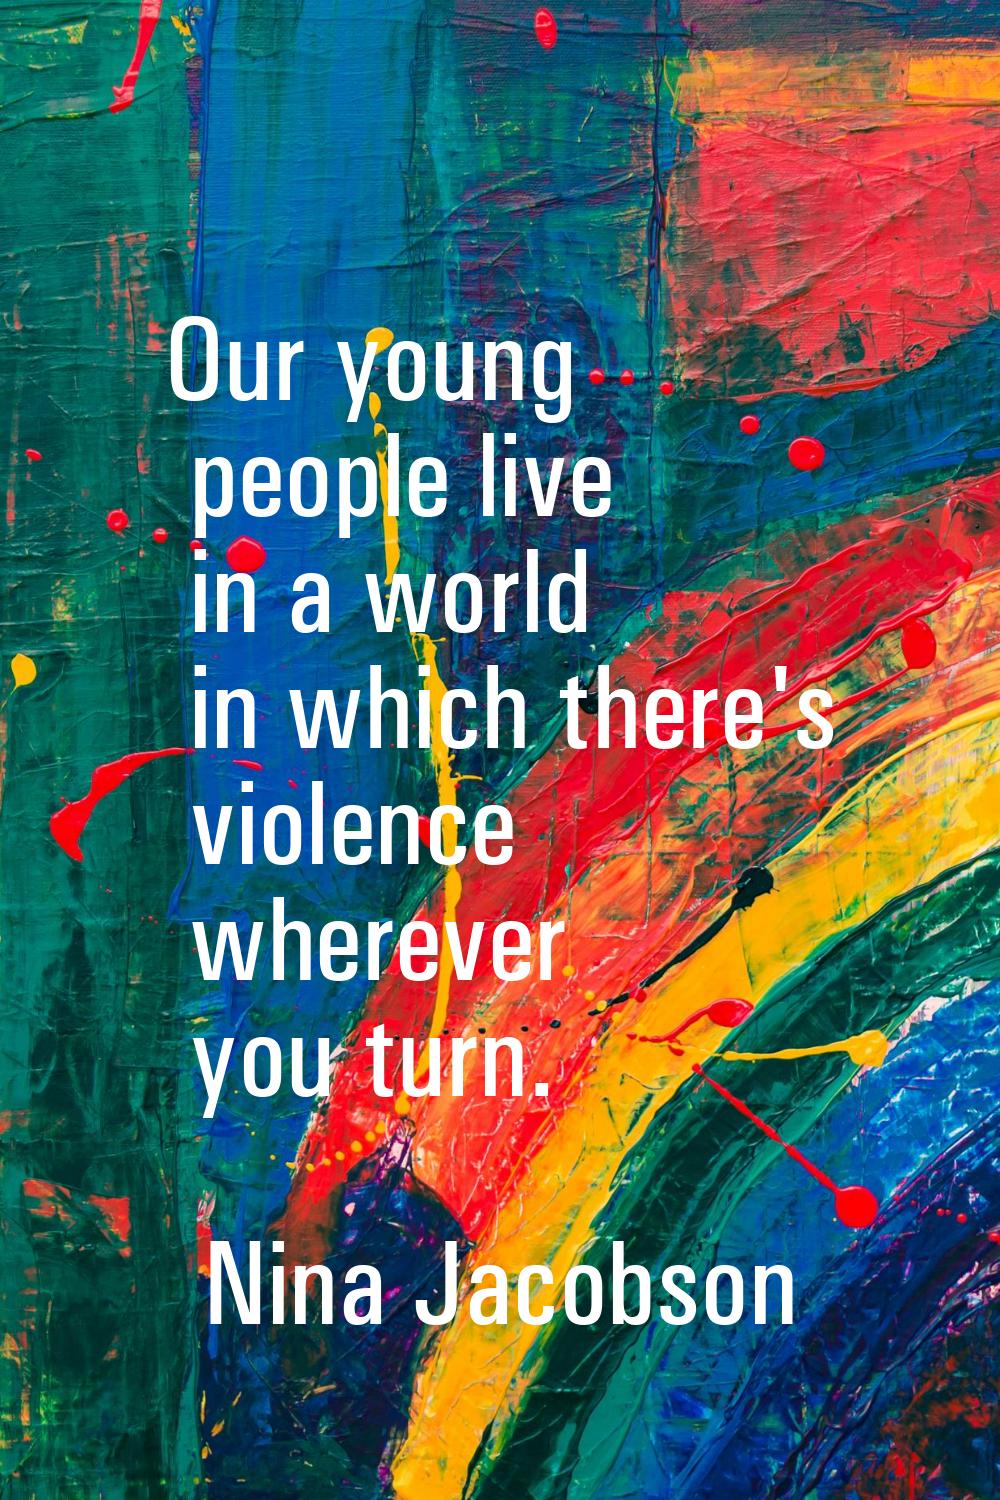 Our young people live in a world in which there's violence wherever you turn.